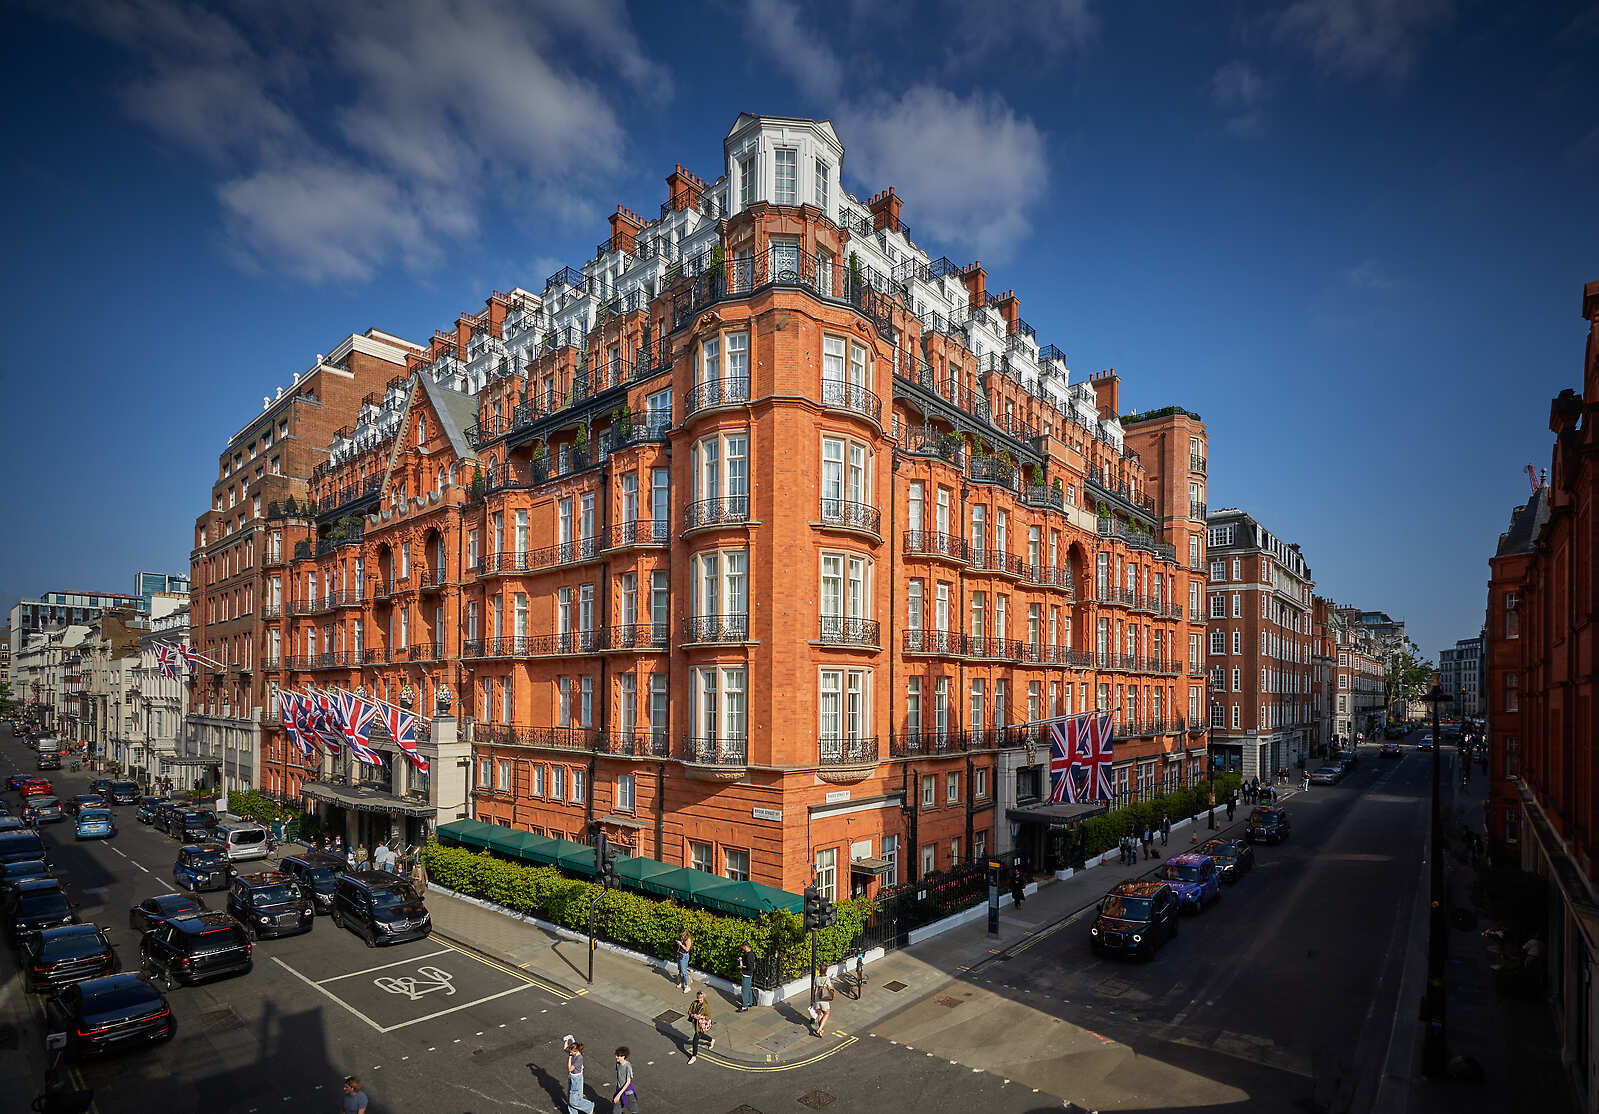 Claridge's afternoon tea and relaxation at the luxury London hotel